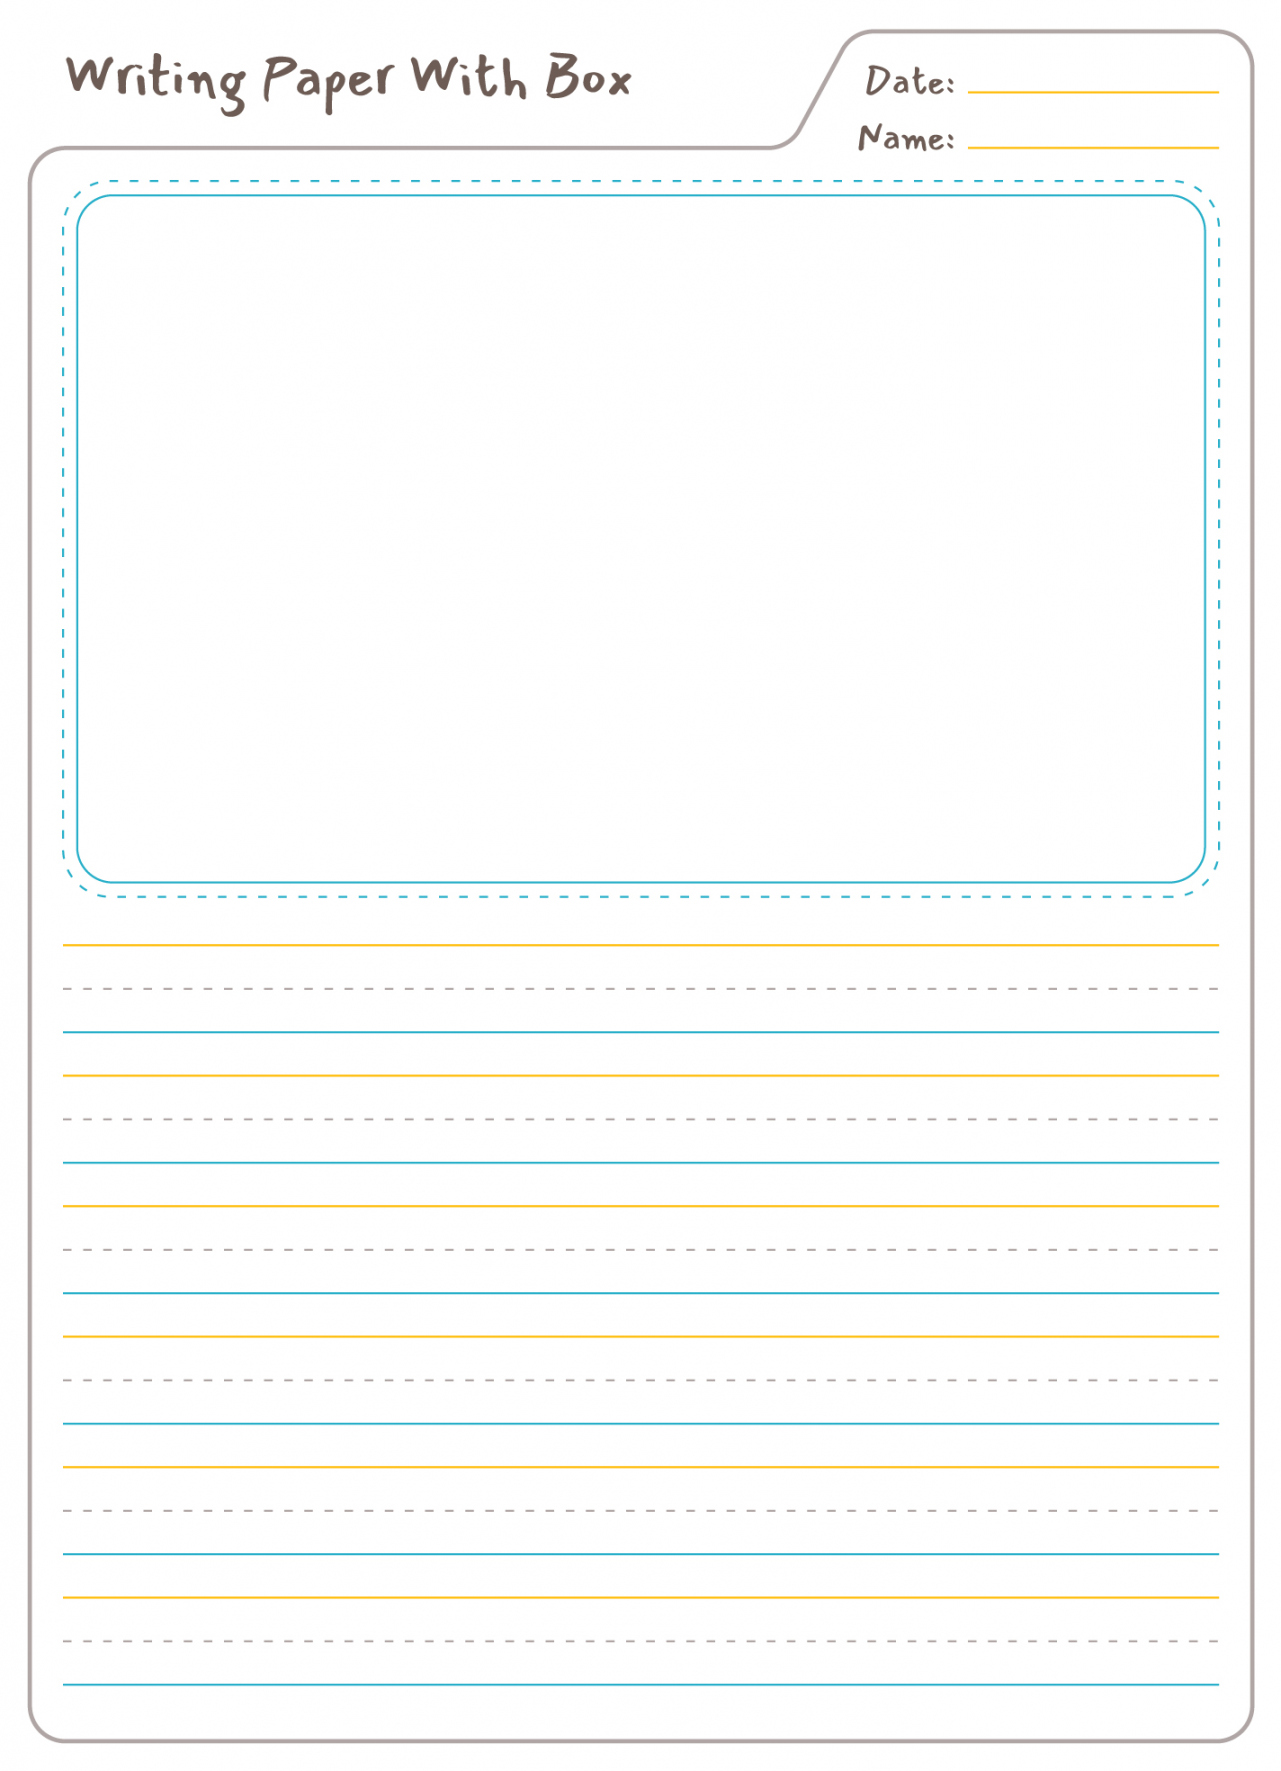 Lined Paper With Picture Box Free Google Docs Template - gdoc - Free Printable Lined Paper With Picture Box